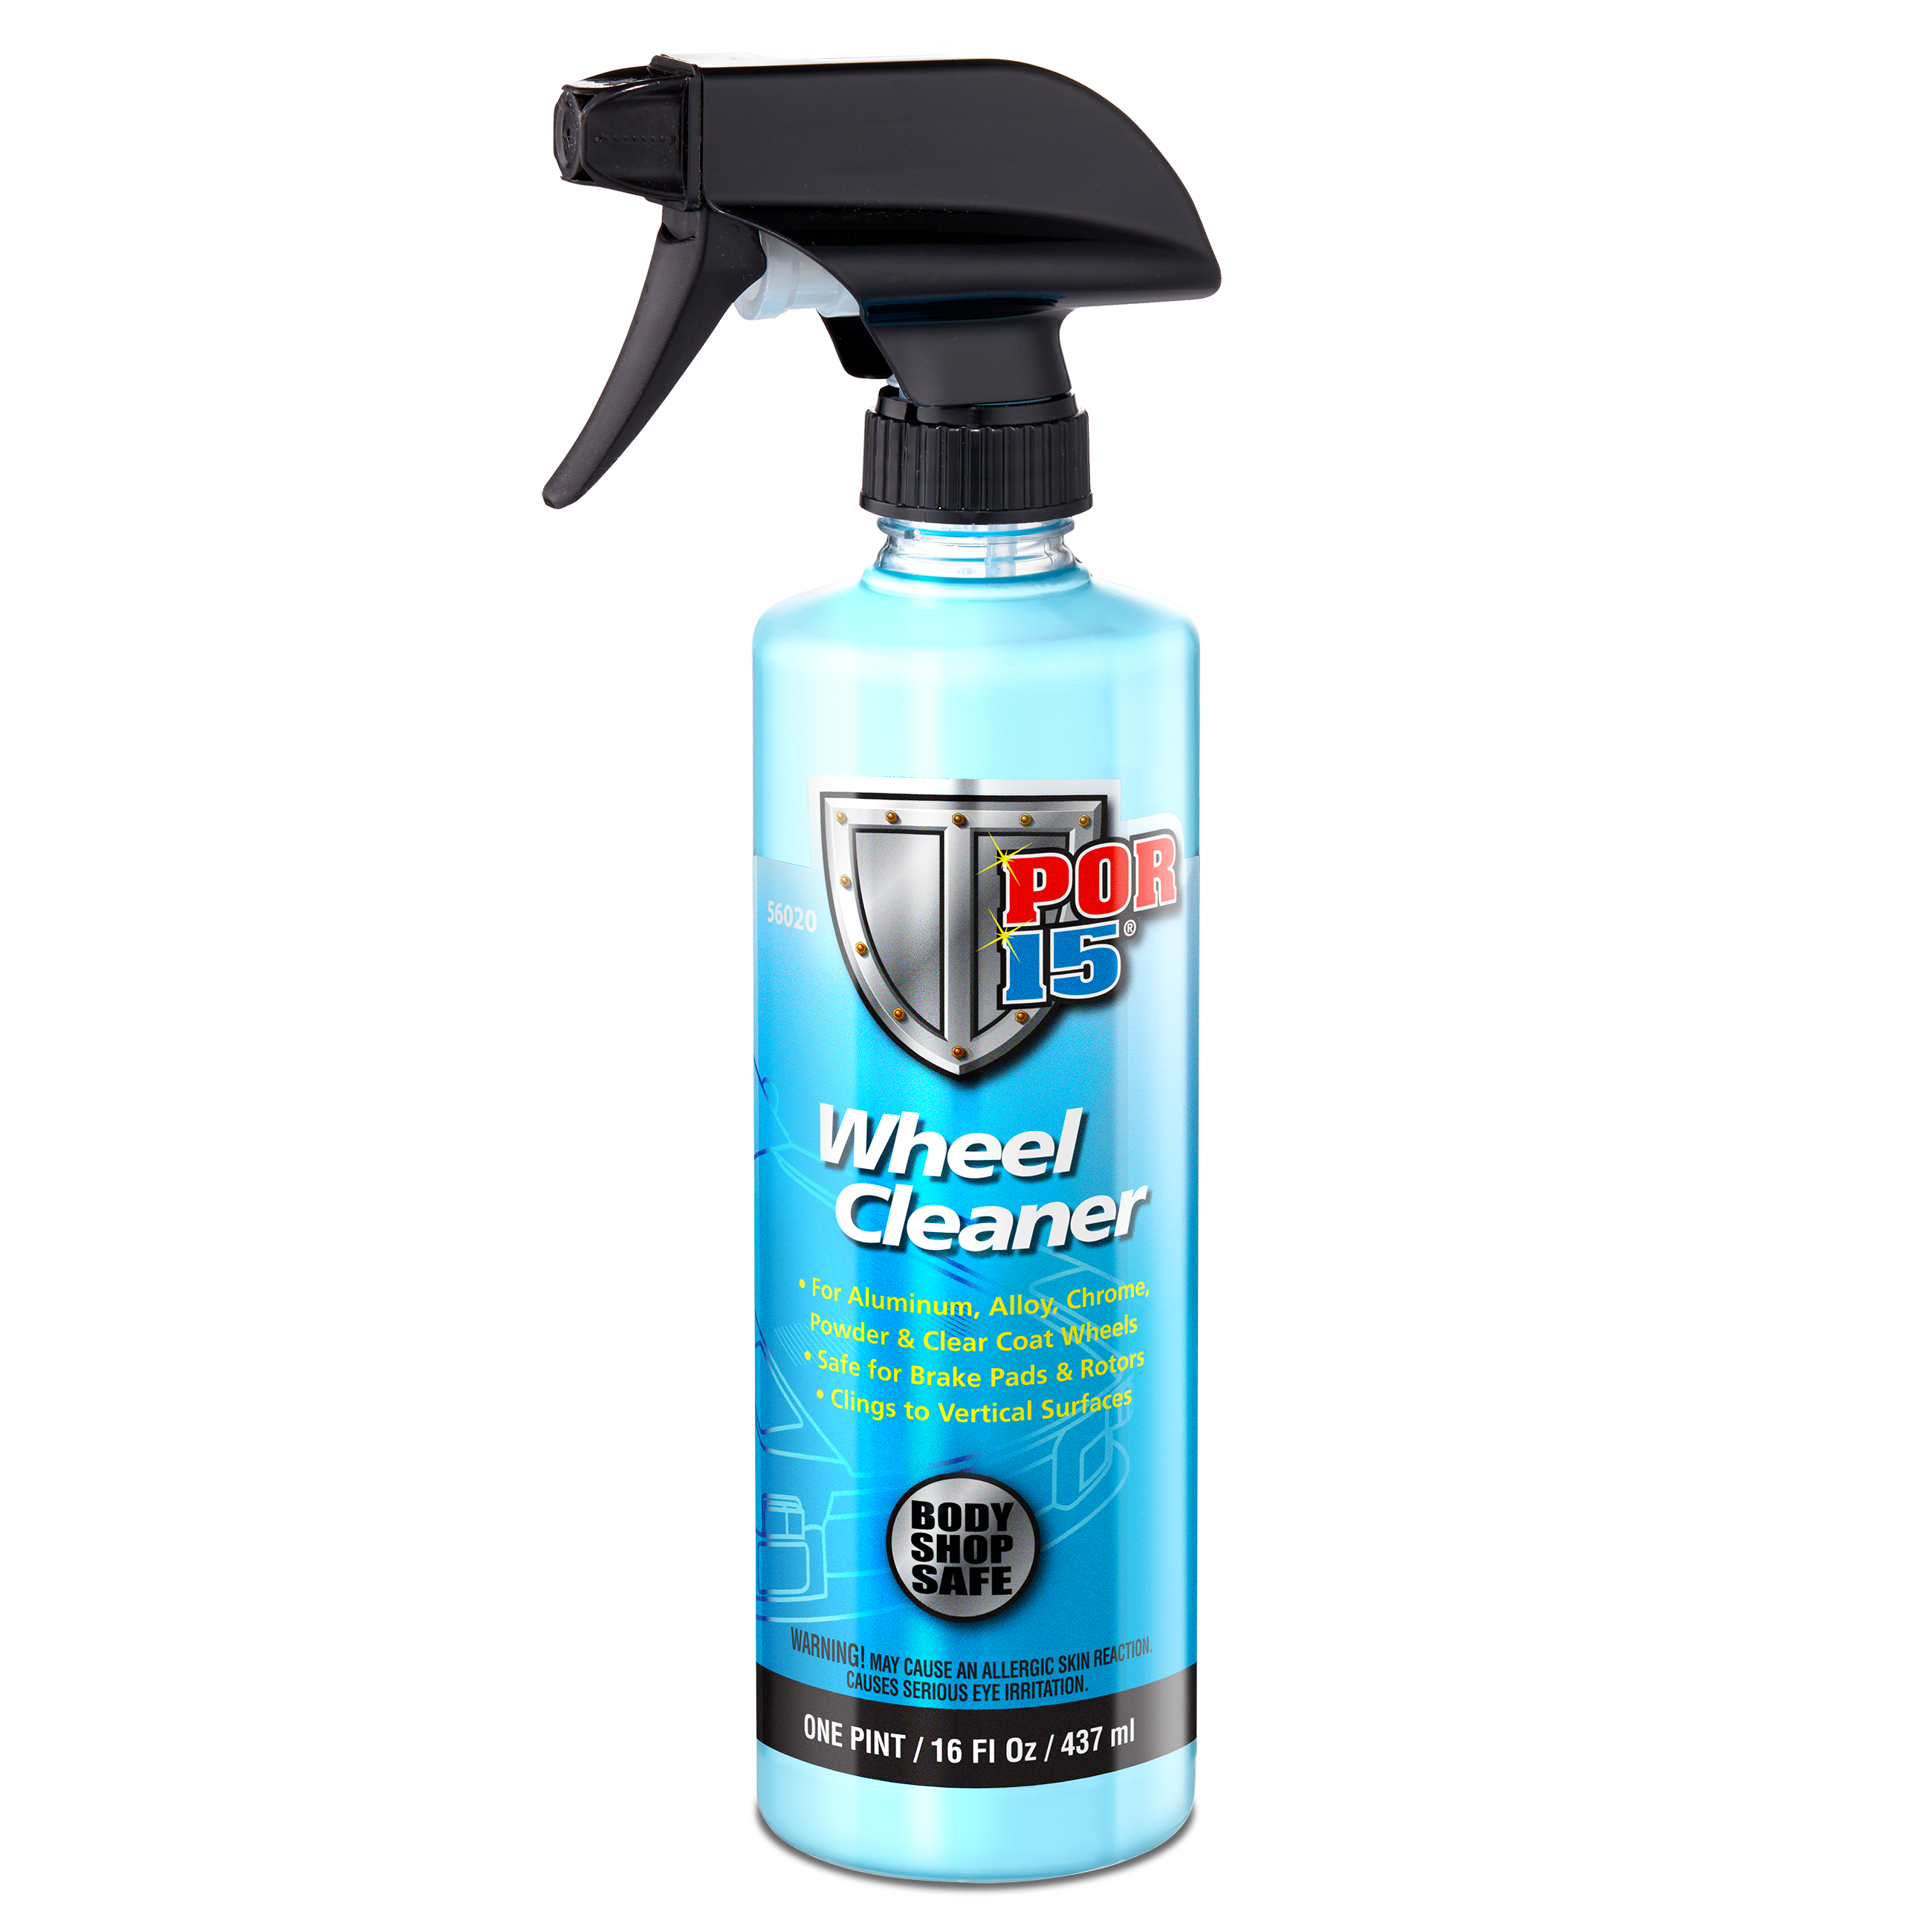 Wheel and Tire Cleaner - Safe for All Wheels Rims - Works on Alloy Chrome